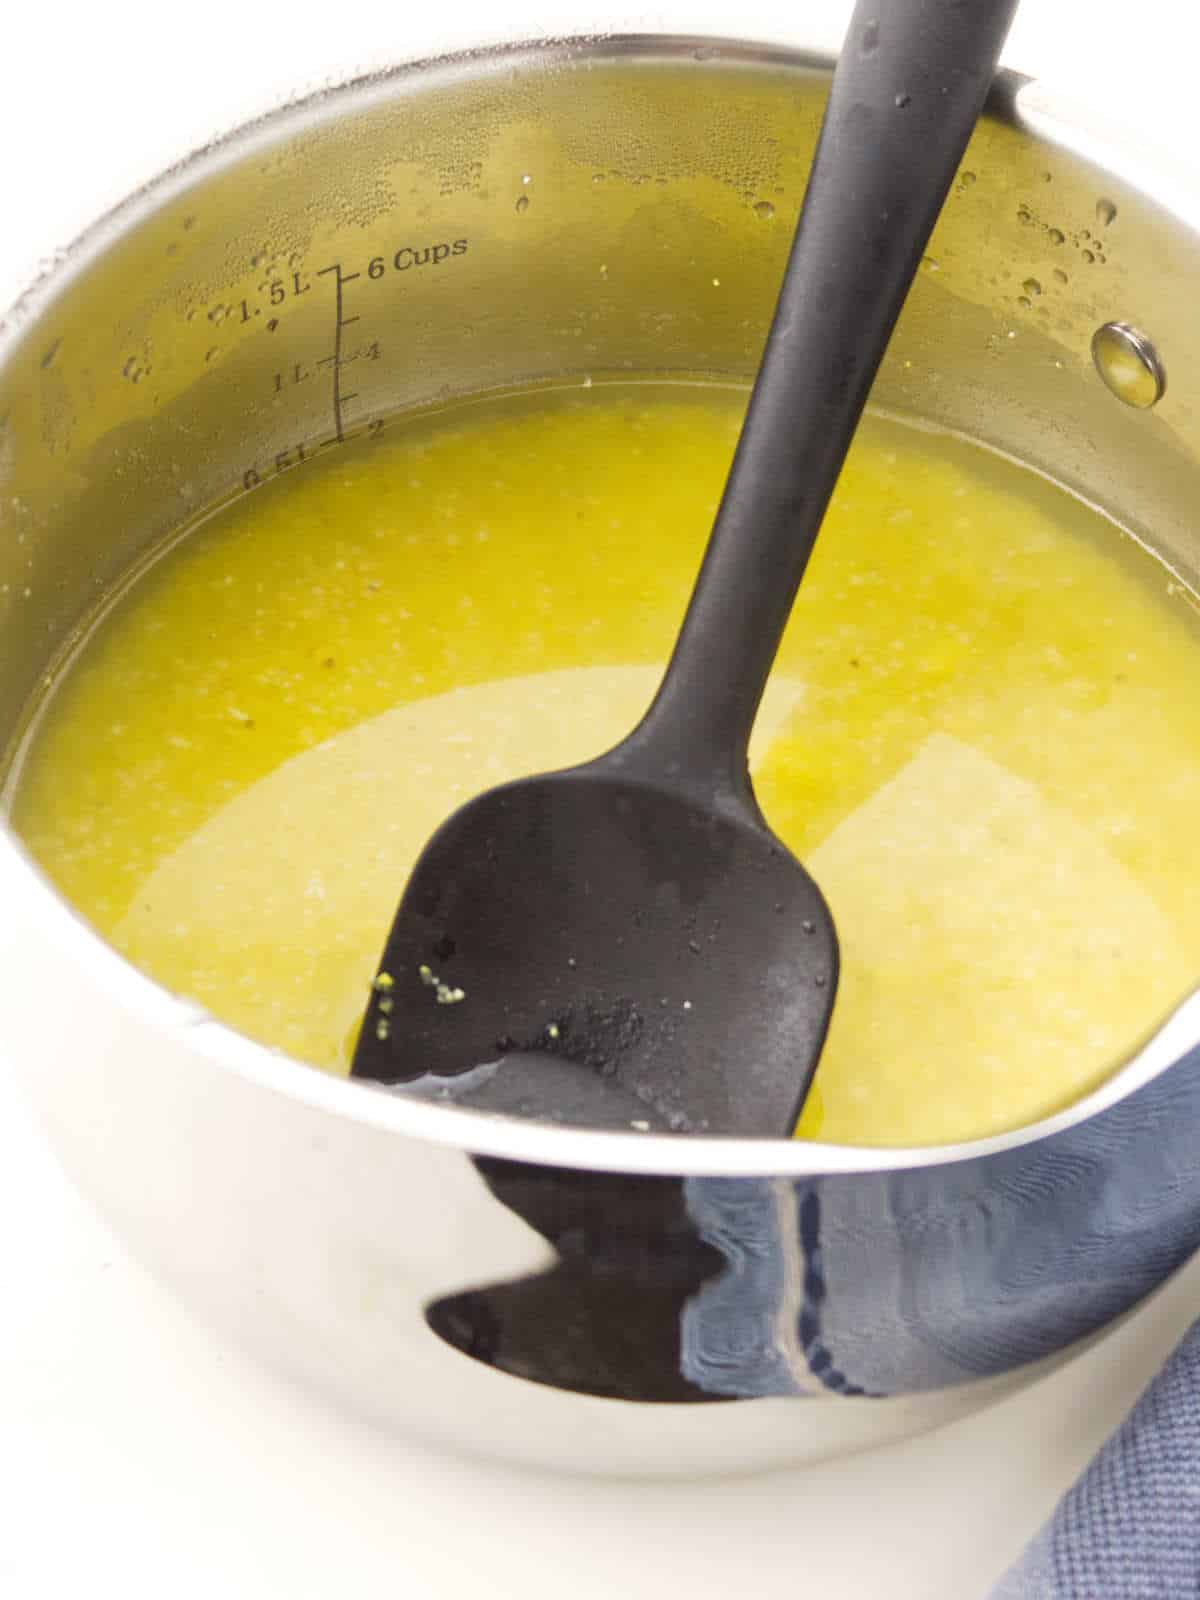 Stainless steel pot with spatula stirring cornmeal.